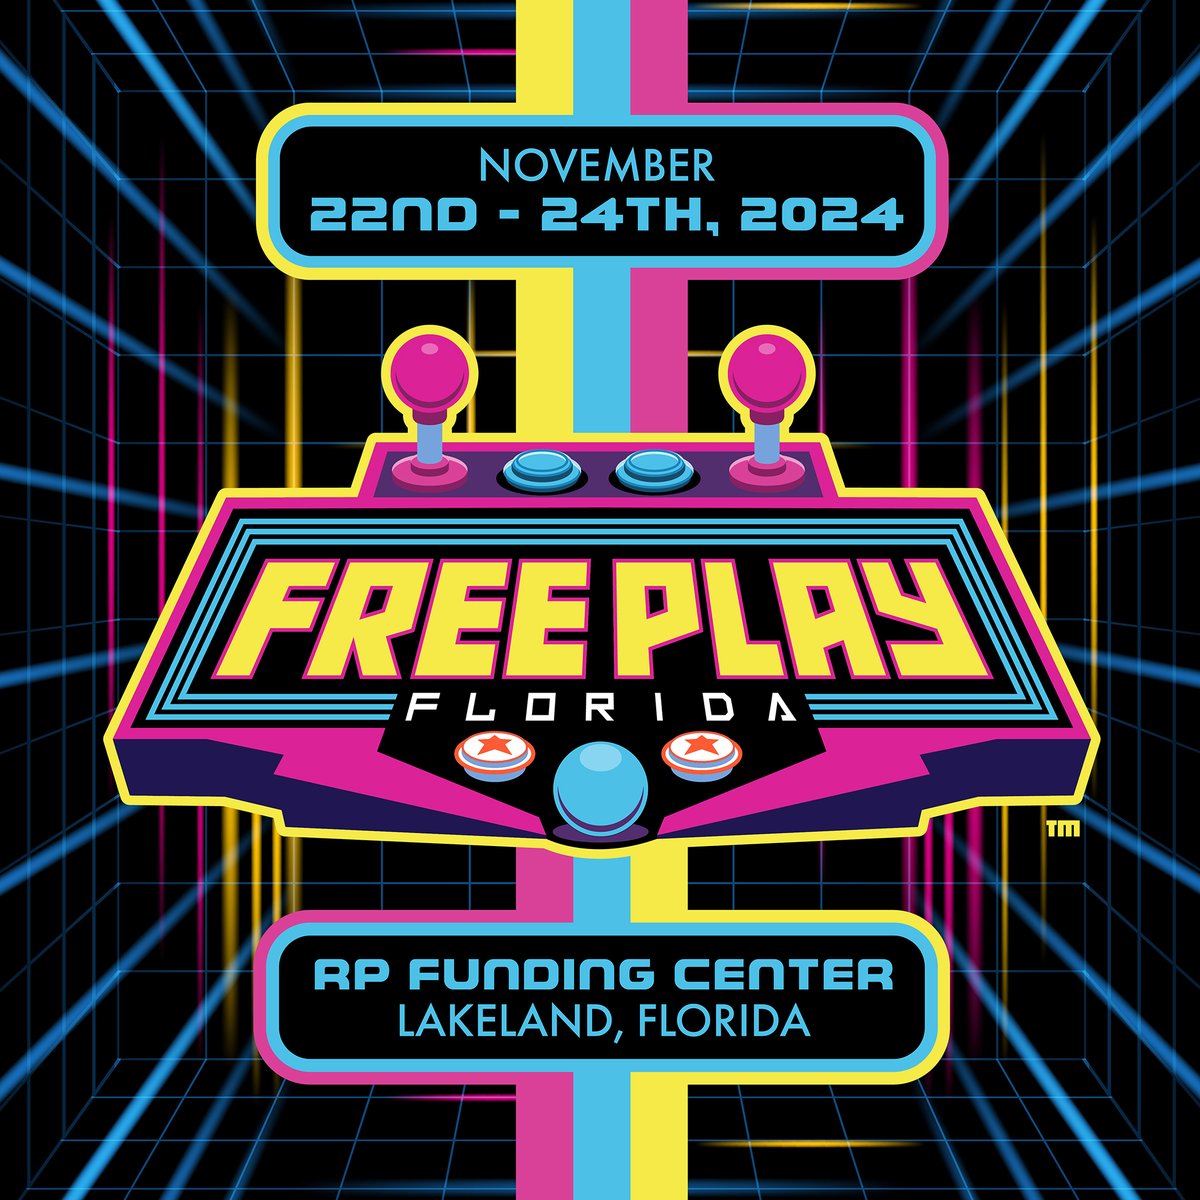 📣🕹️🤩Get ready for the ultimate Pinball, Arcade, and Retrogaming Experience because your favorite expo, Free Play Florida, is back this fall on November 22nd-24th! 

👉 Tickets: bit.ly/3T5DRB4

Visit our website for hotel info. 

#freeplayflorida #retrogamingexpo